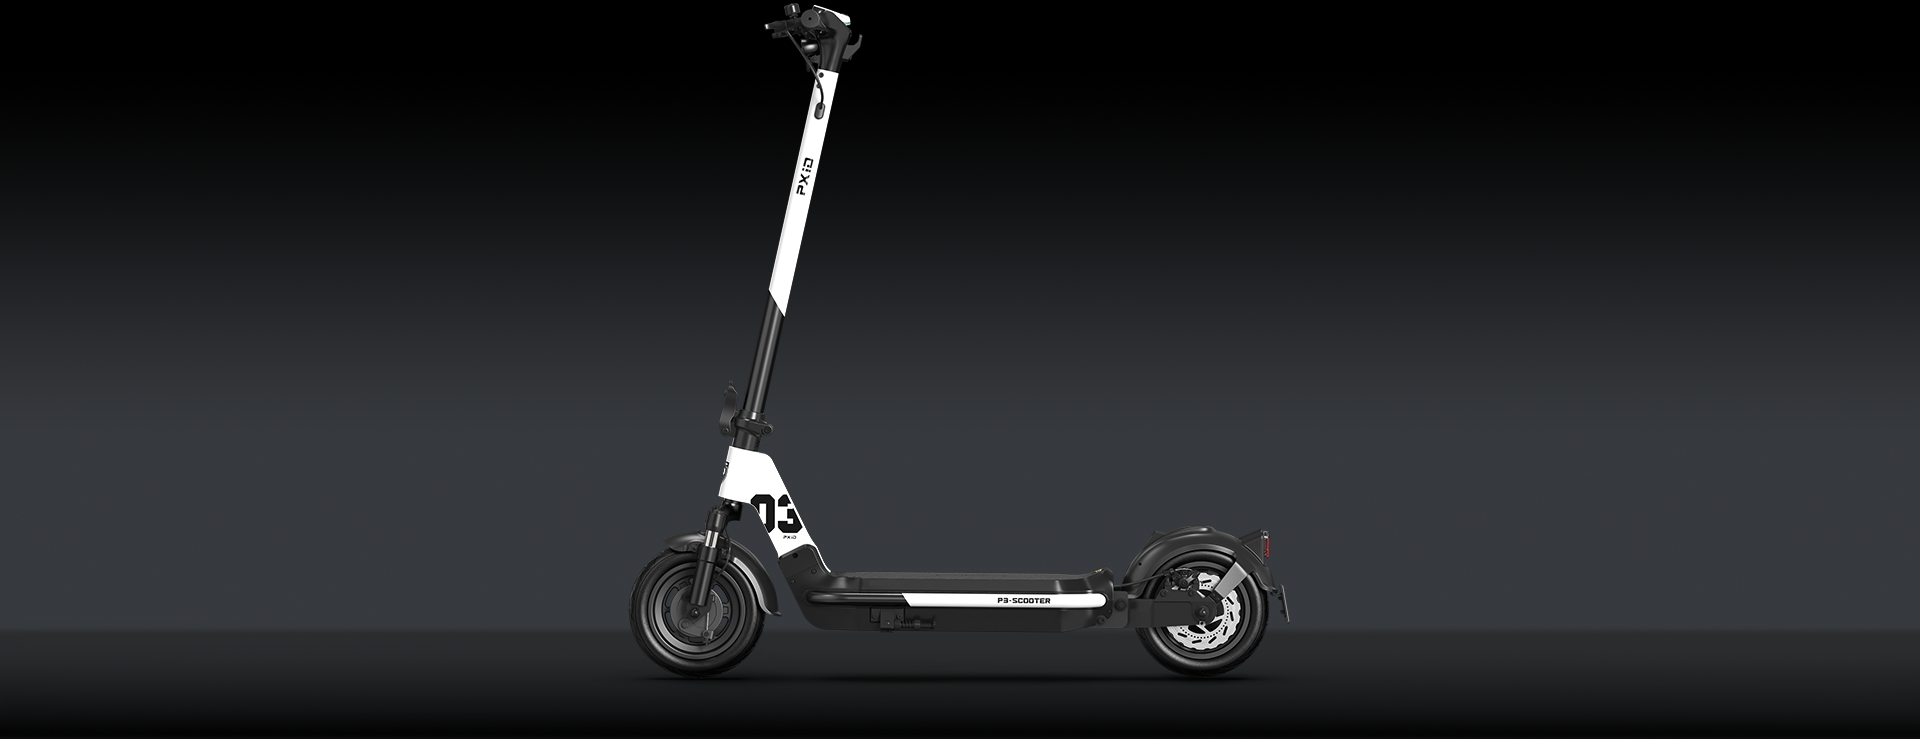 10 inch electric scooter 